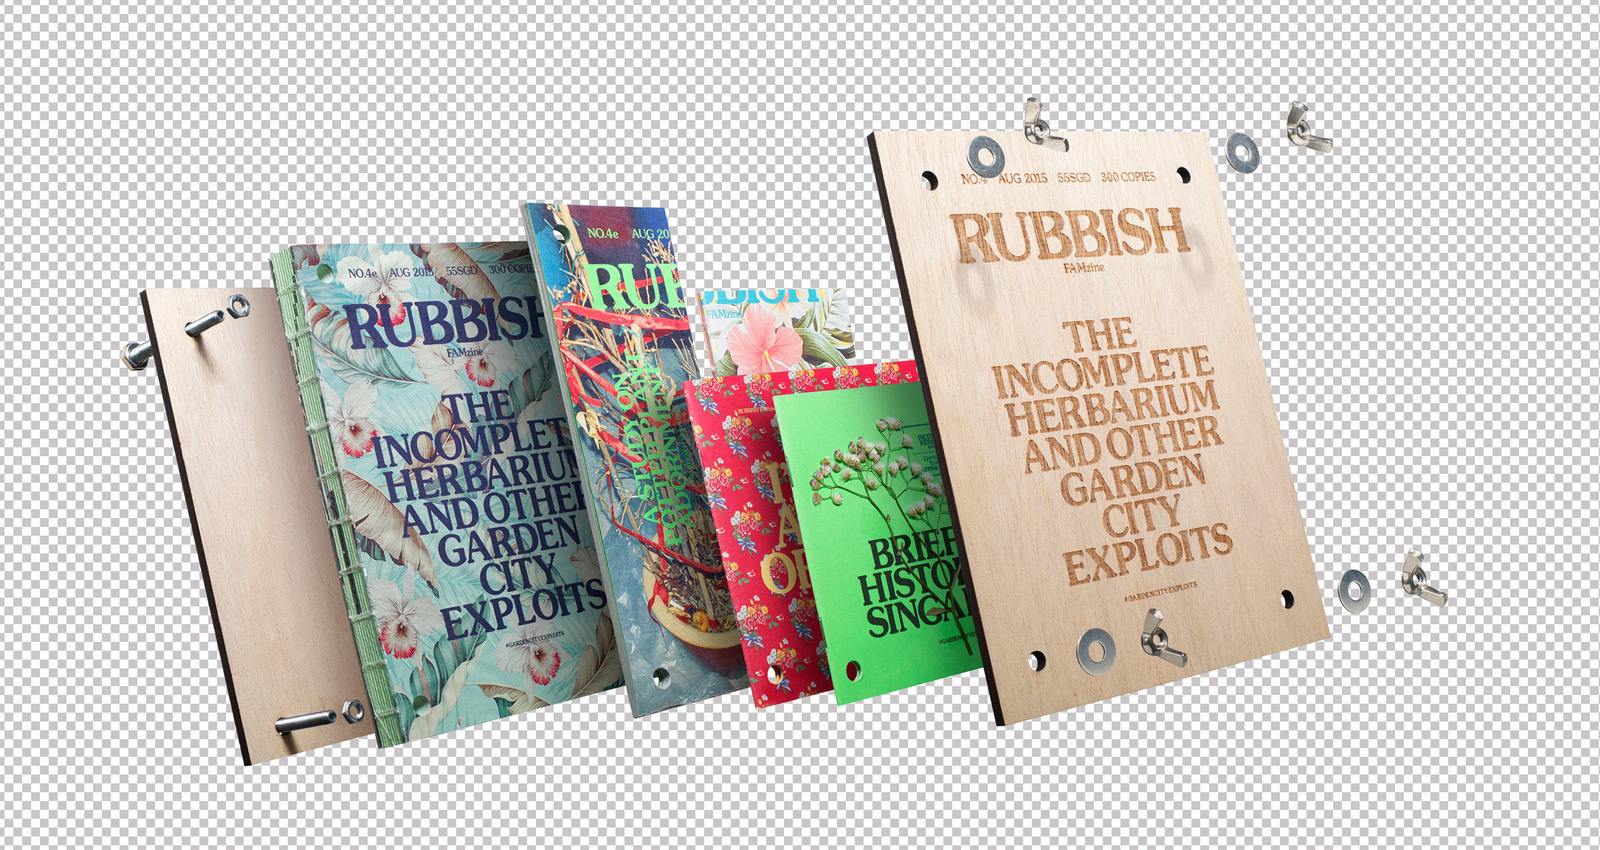 Rubbish Famzine- The Incomplete Herbarium and other Garden CIty Exploits